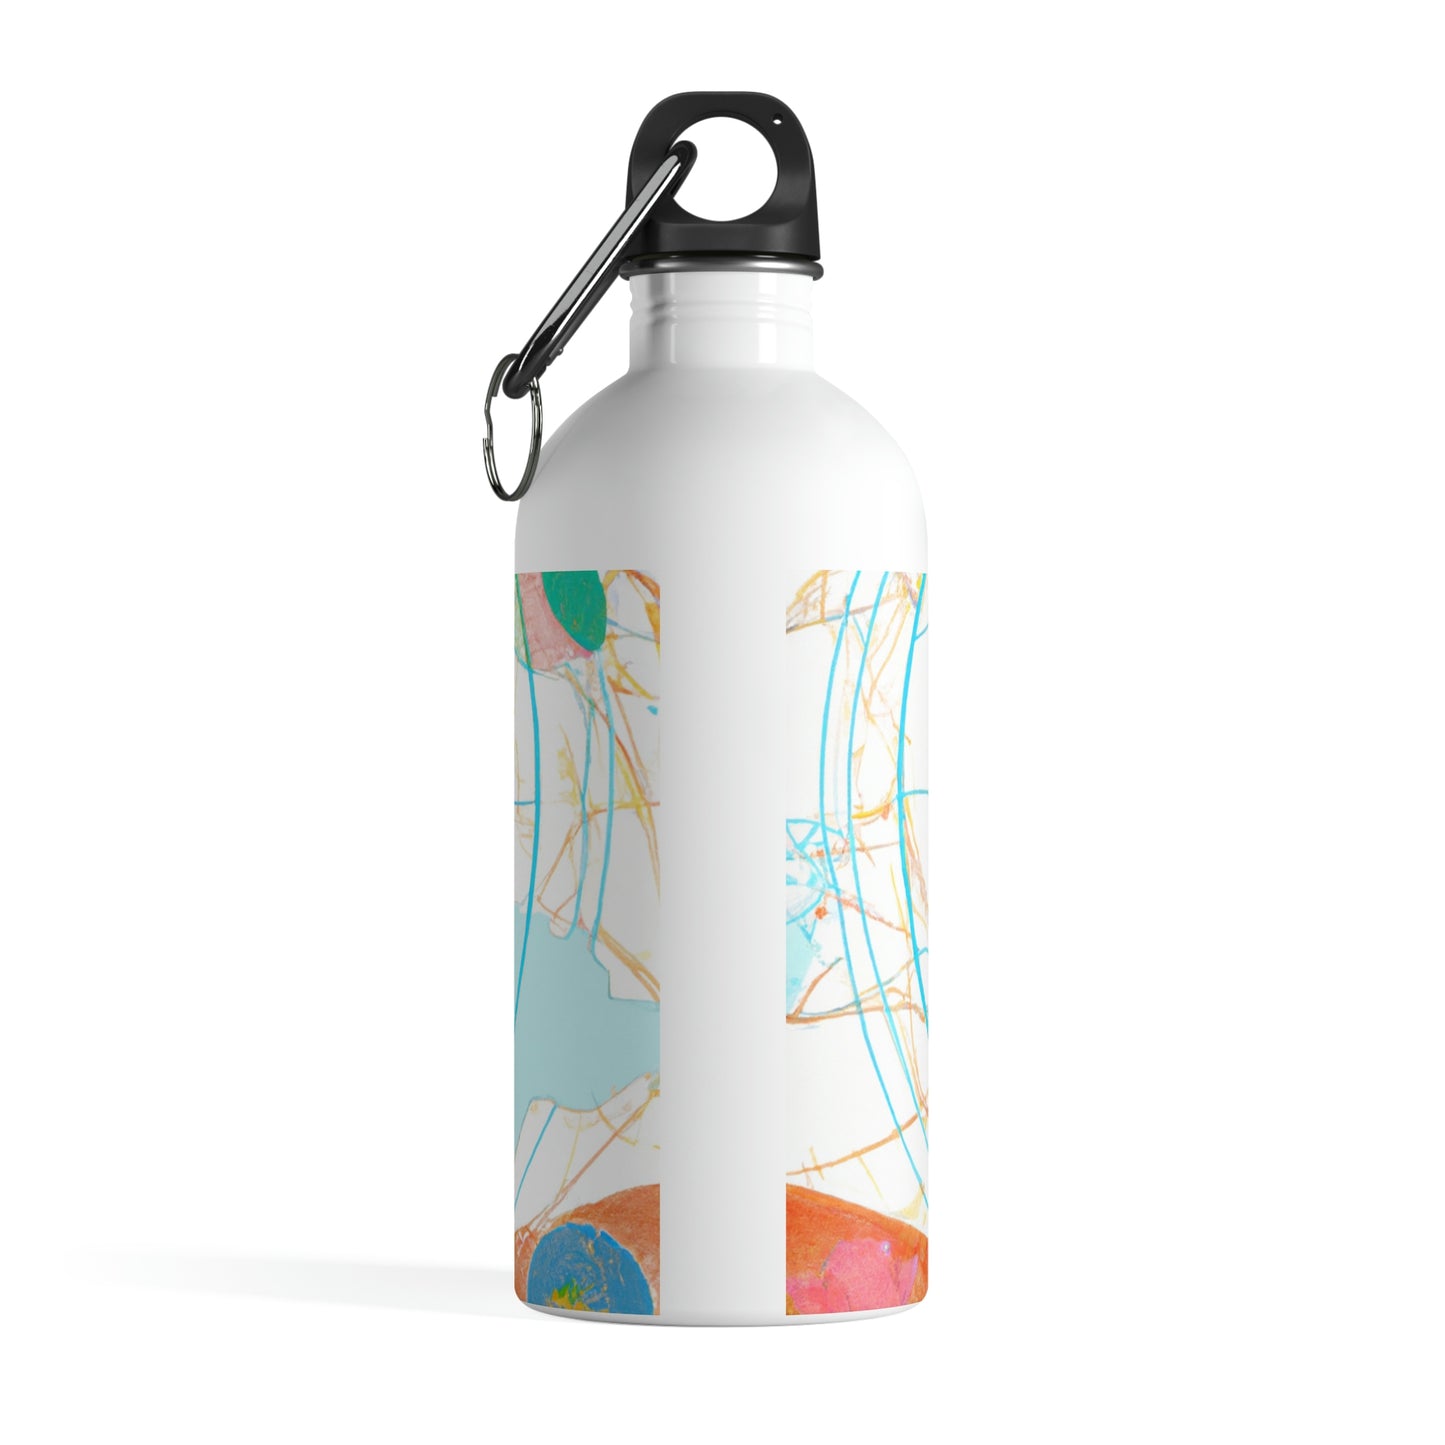 their school

The Secret Realm of High School - The Alien Stainless Steel Water Bottle